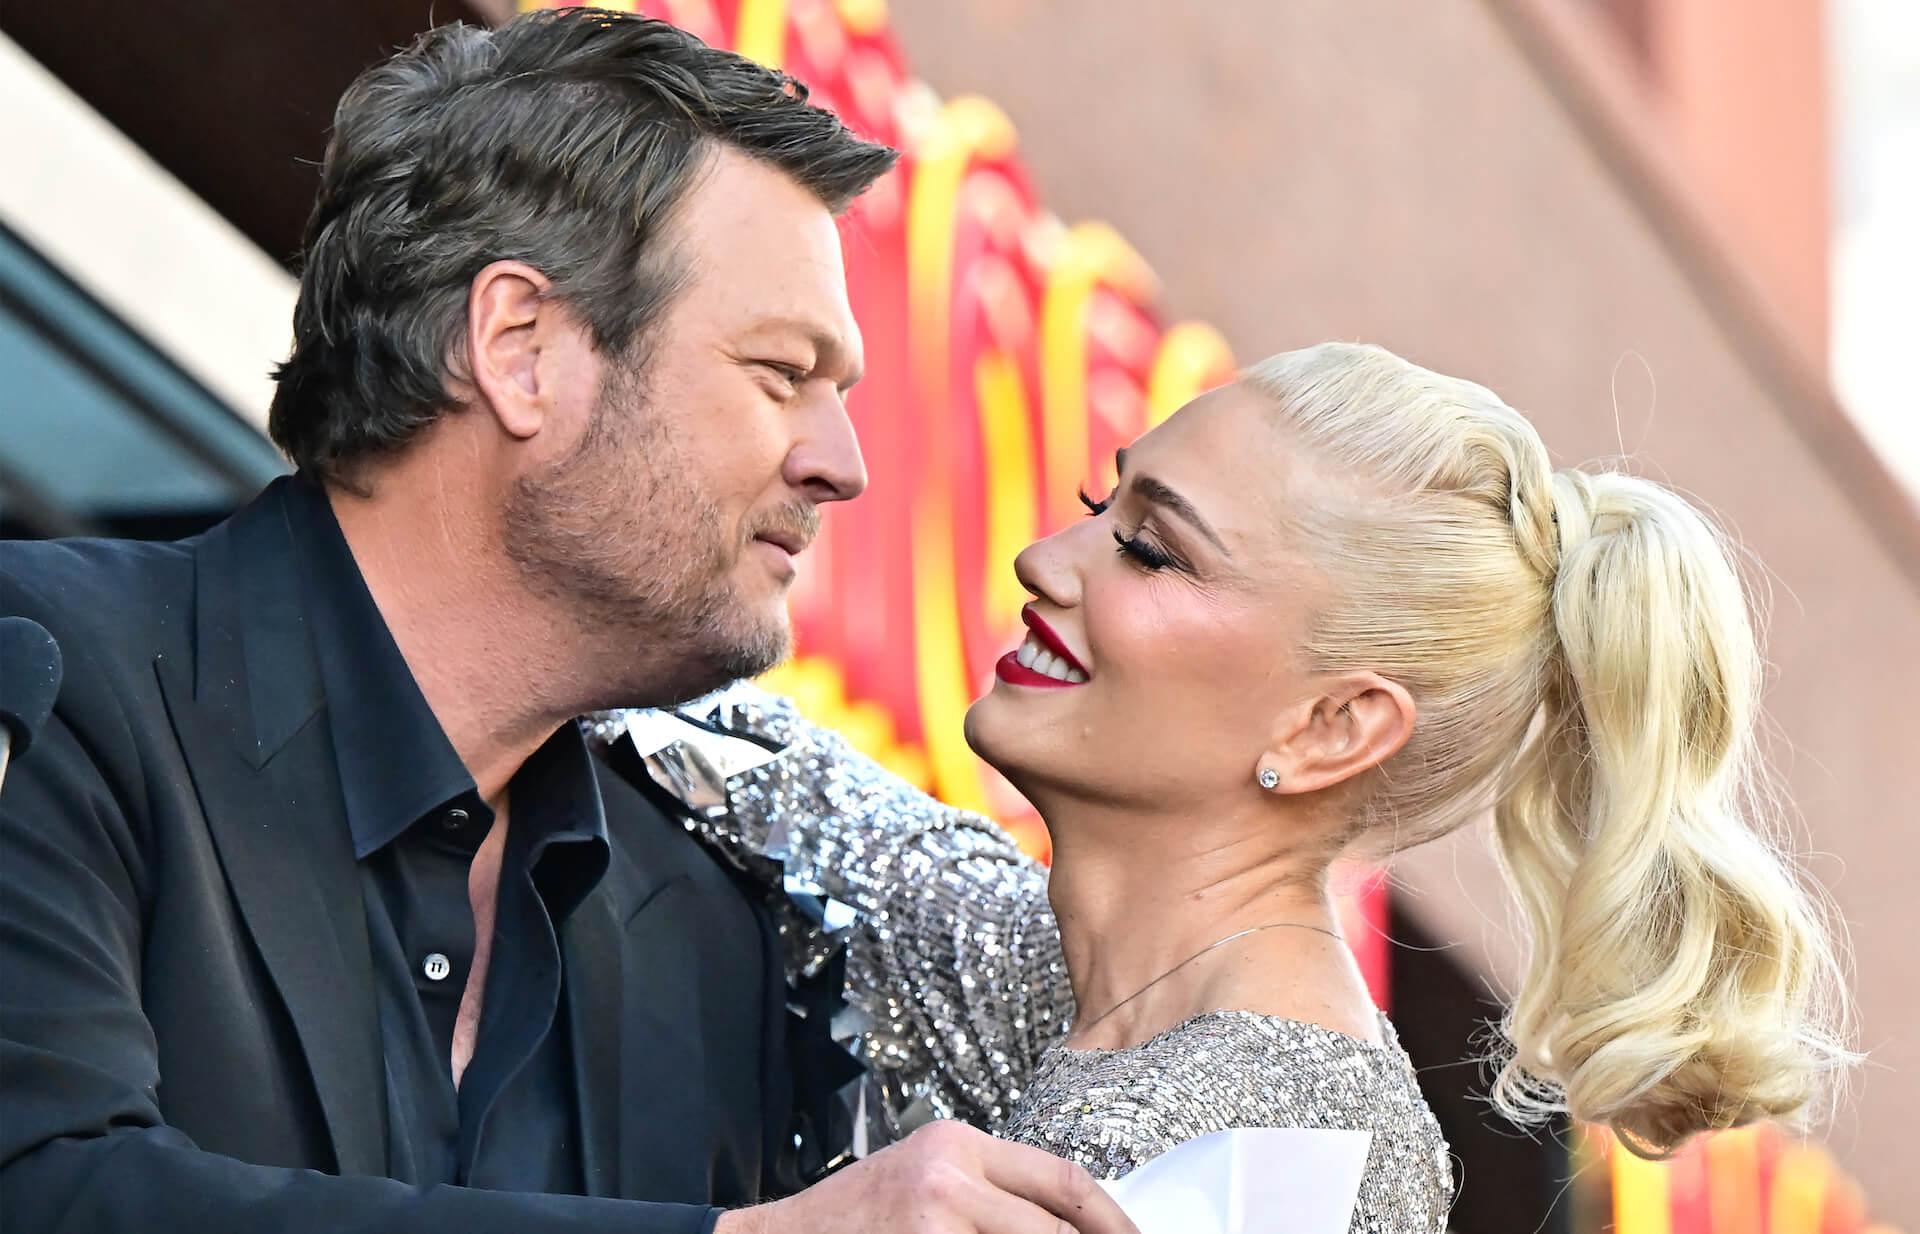 Blake Shelton and Gwen Stefani looking into each other's eyes